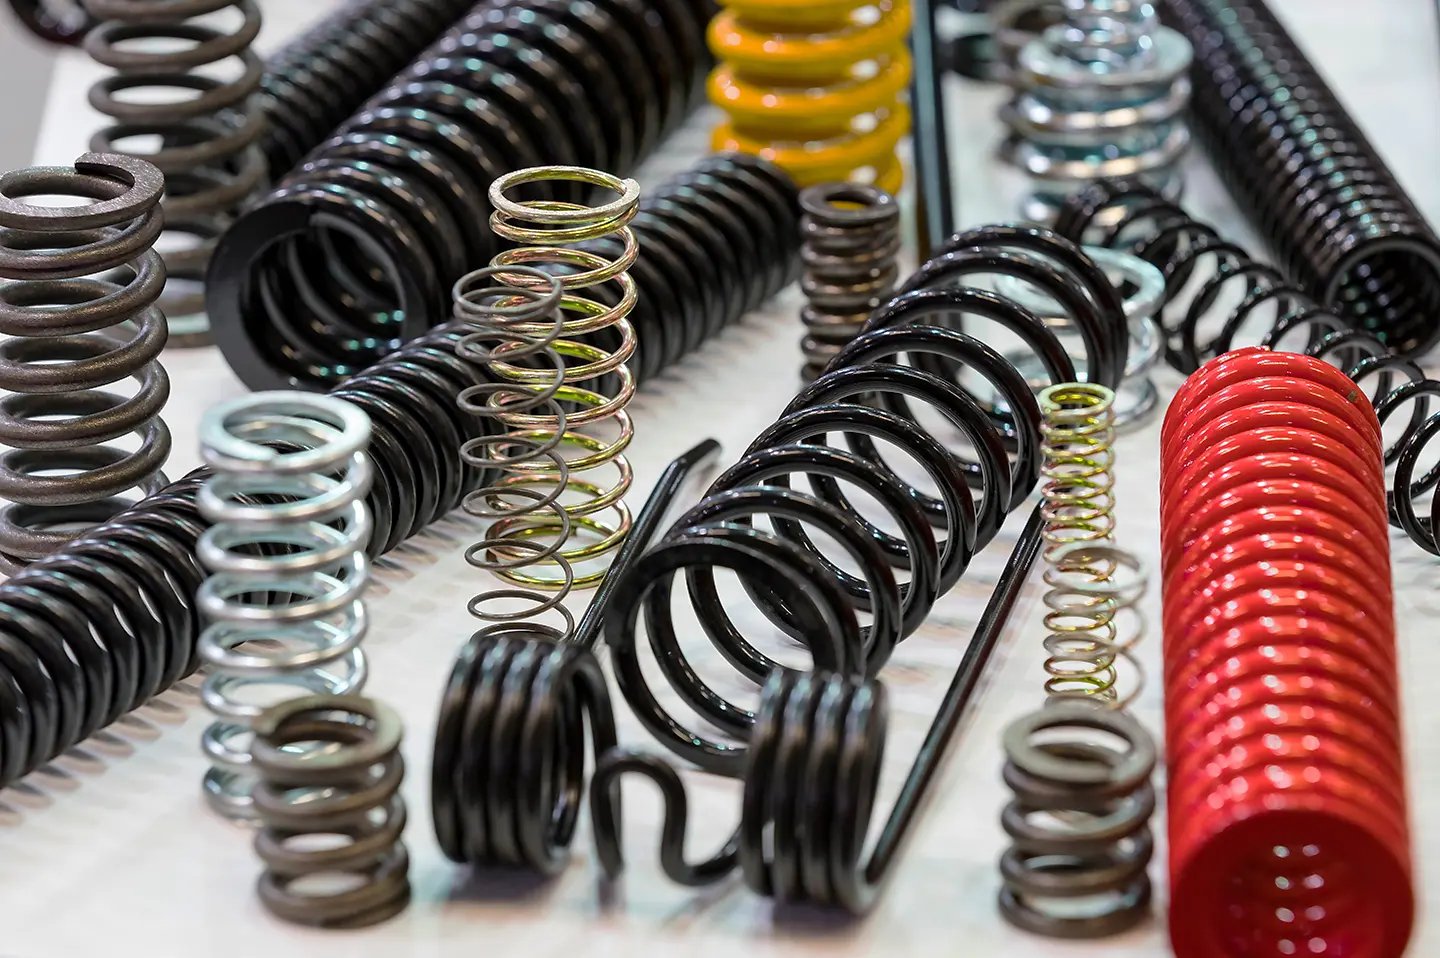 Tough, durable springs and wireforms for construction